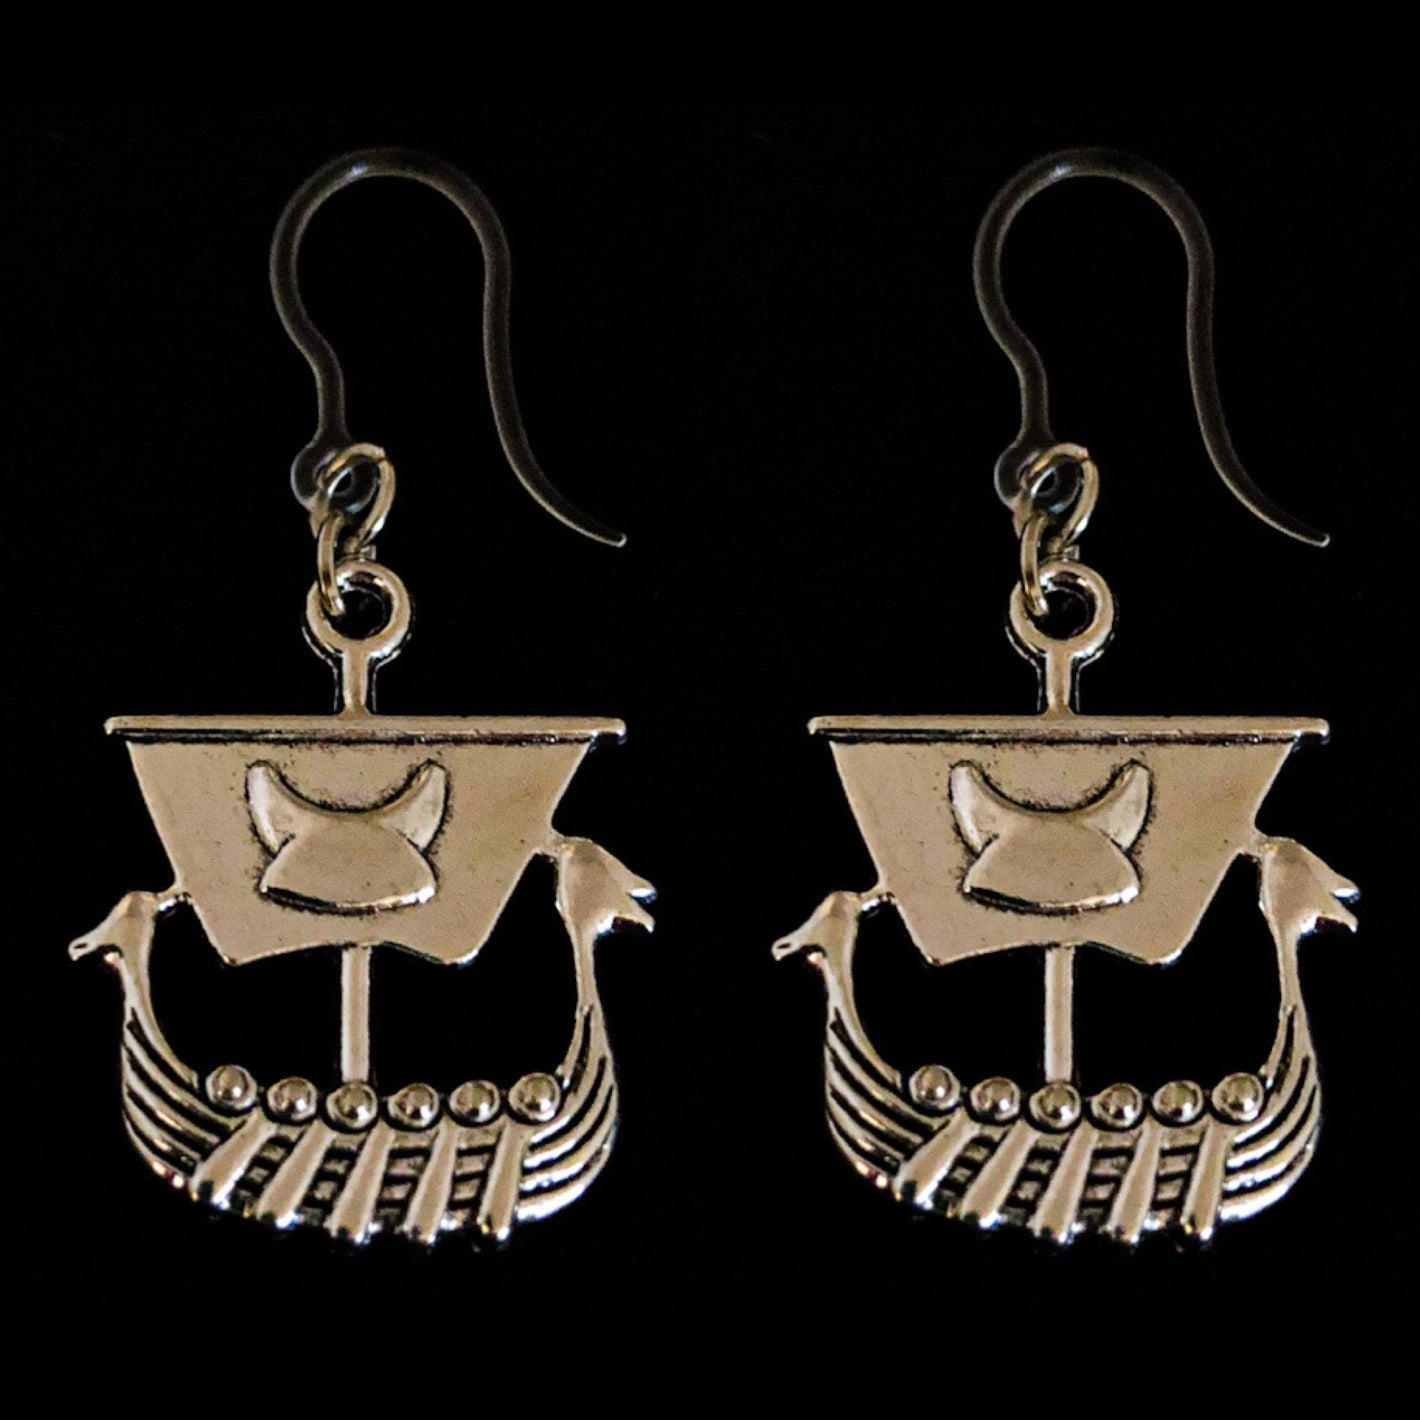 Viking Ship Dangles Hypoallergenic Earrings for Sensitive Ears Made with Plastic Posts